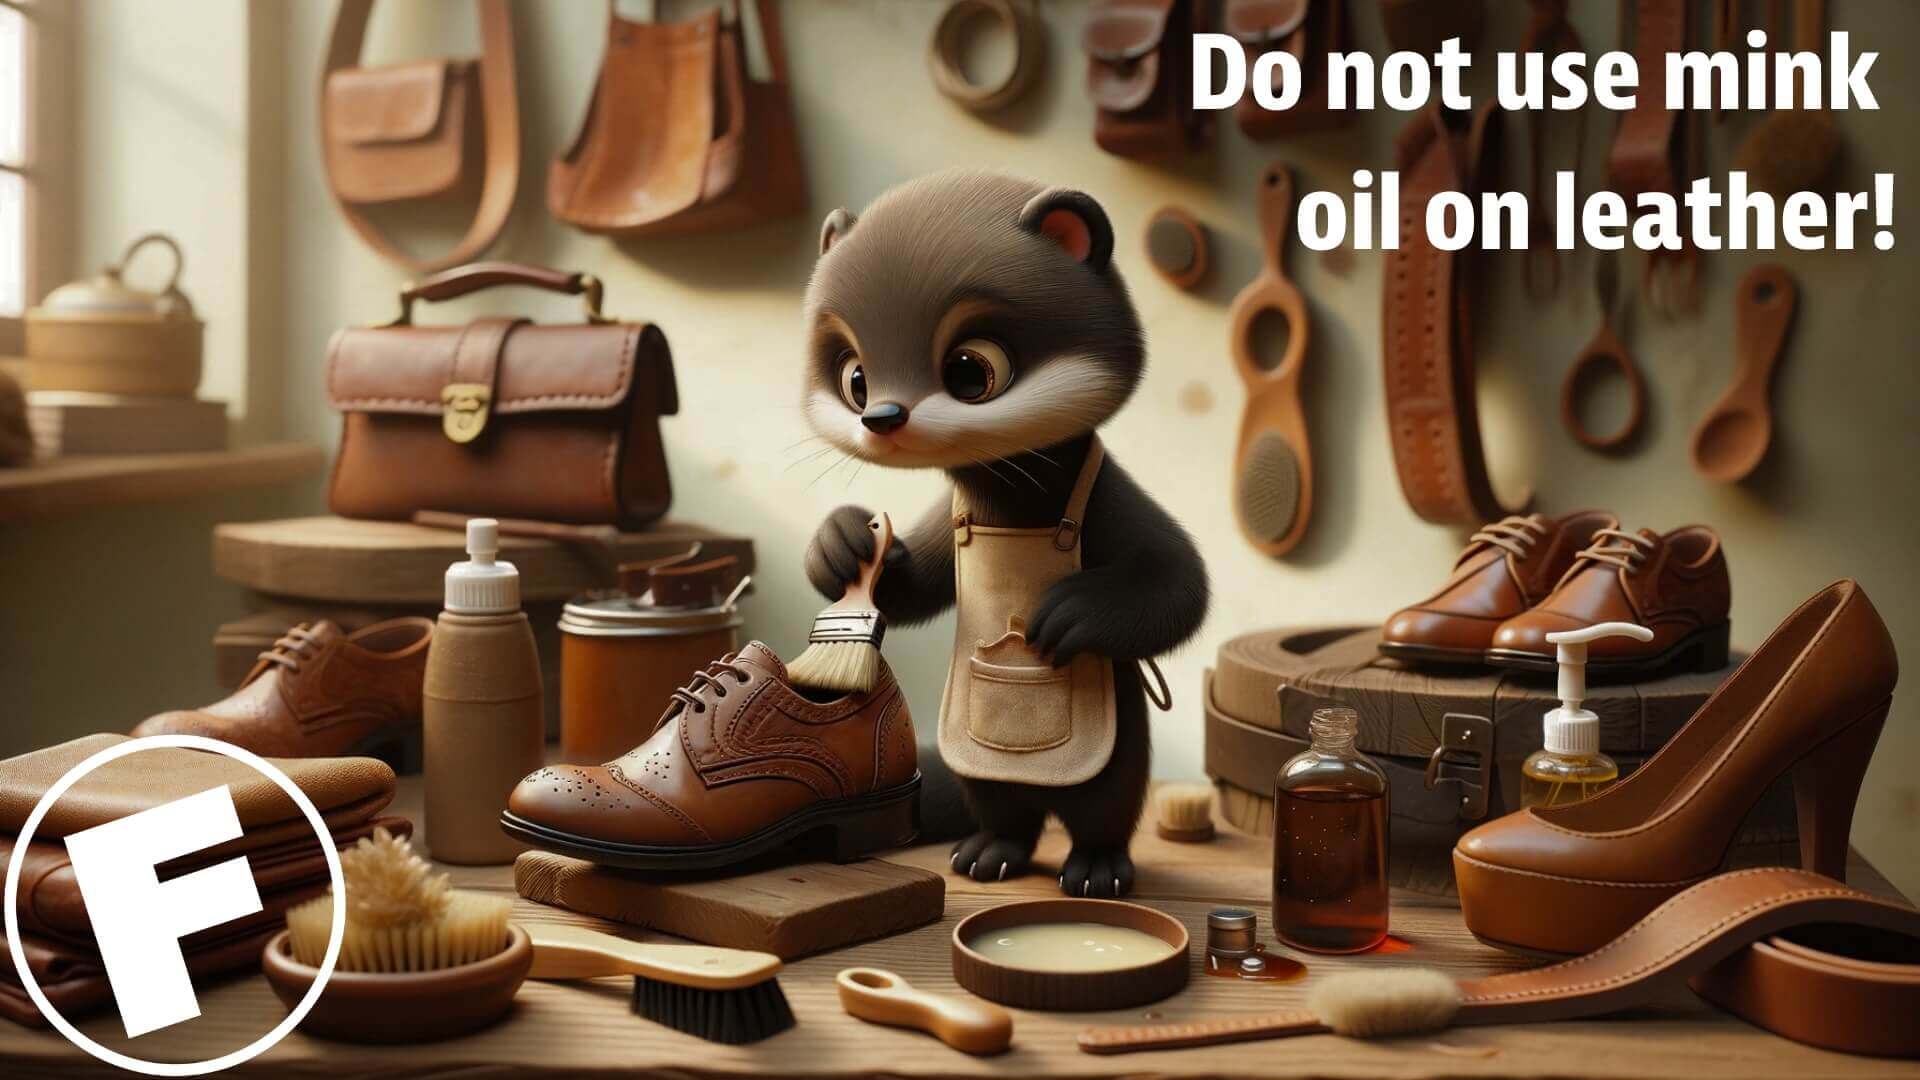 a mink leatherer applying its oil to a leather shoe